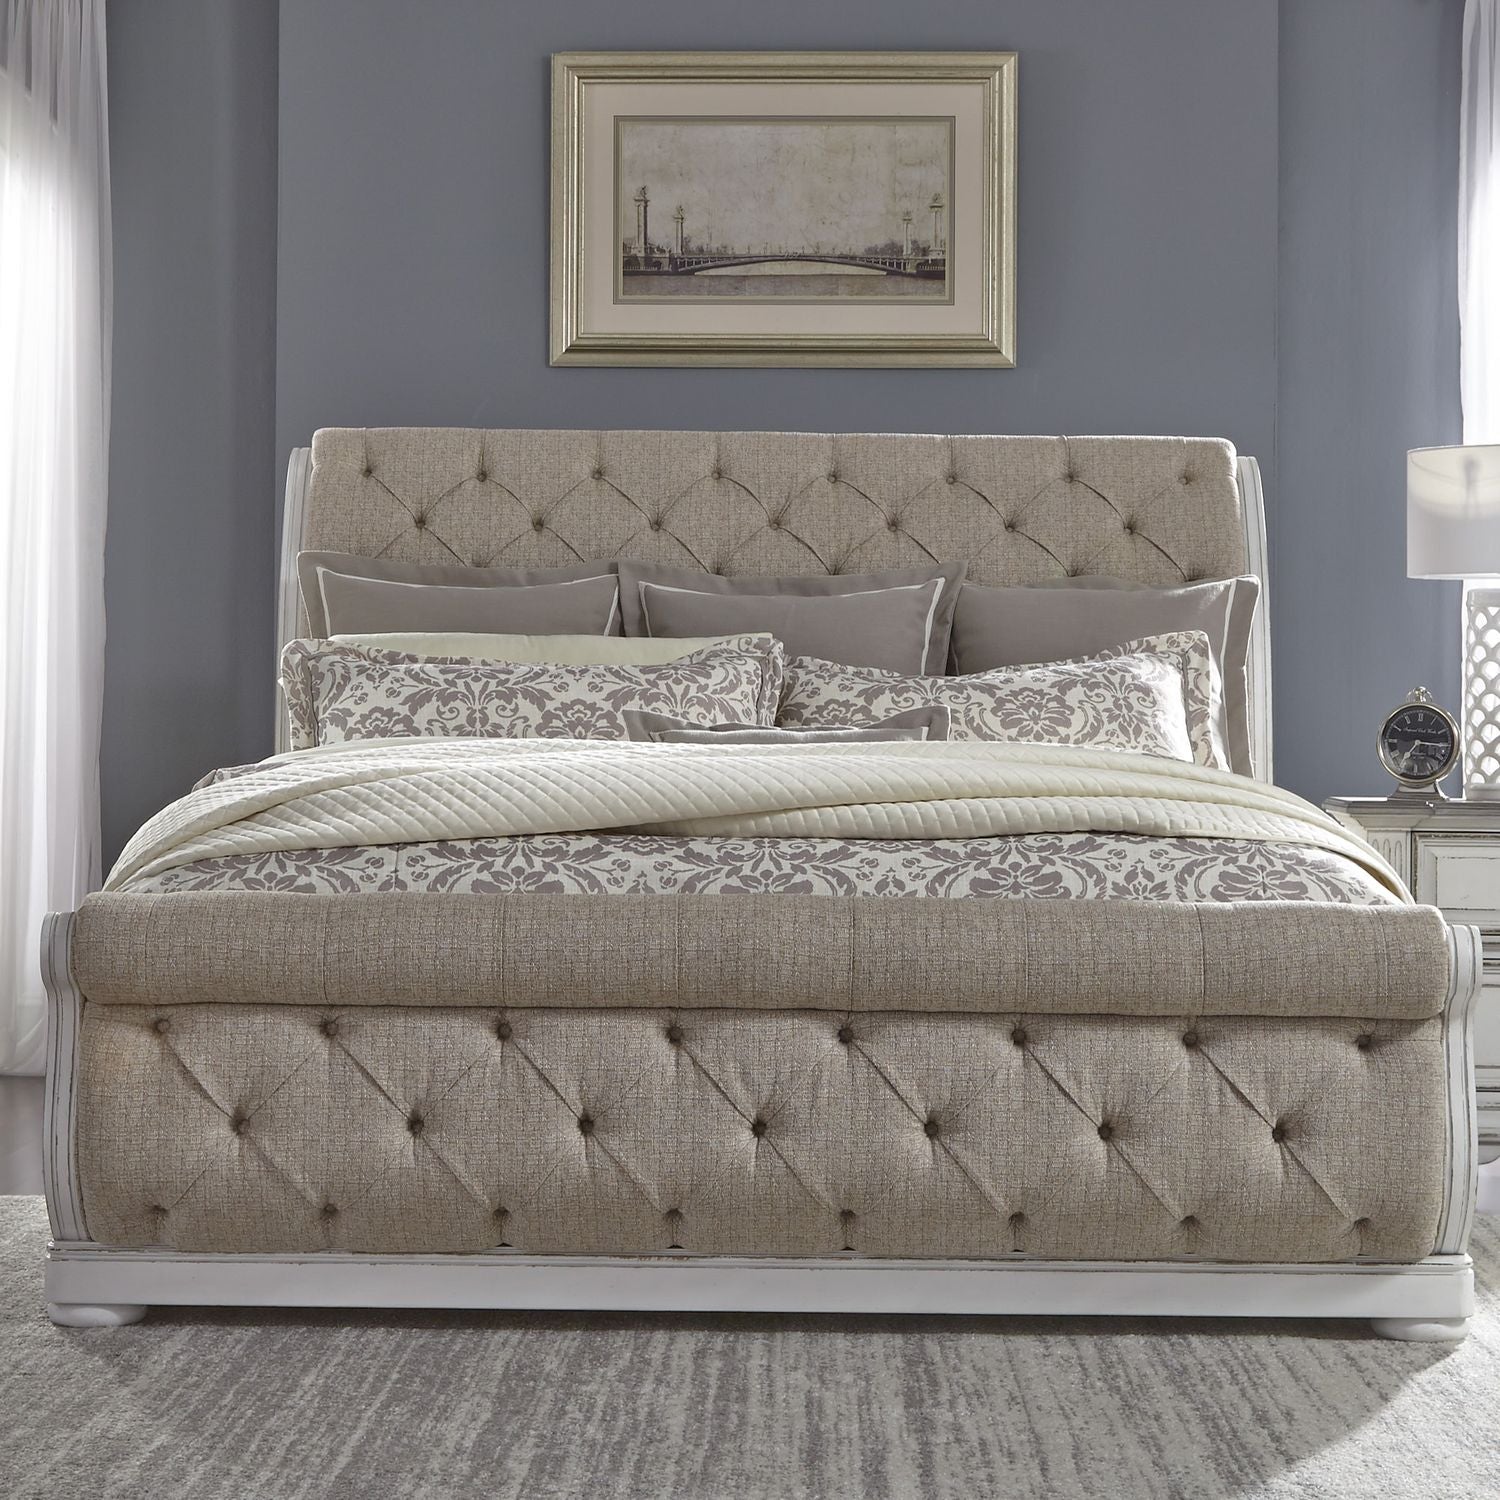 Abbey Park 520-BR Upholstered Sleigh Bedroom Collection from Liberty Furniture